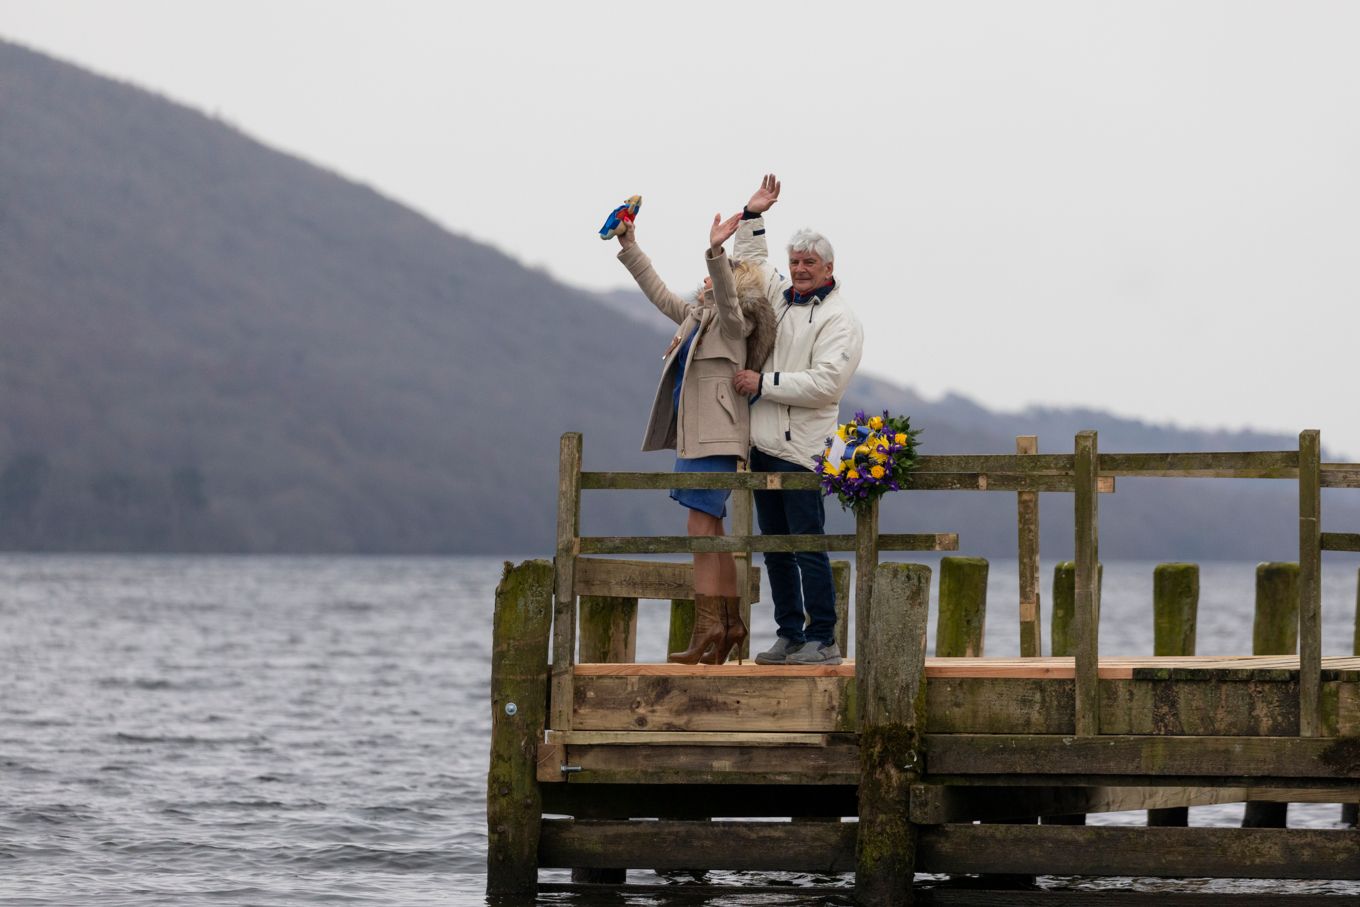 Image shows Donald Campbell's daughter waving at the aircraft flying over Coniston Water.